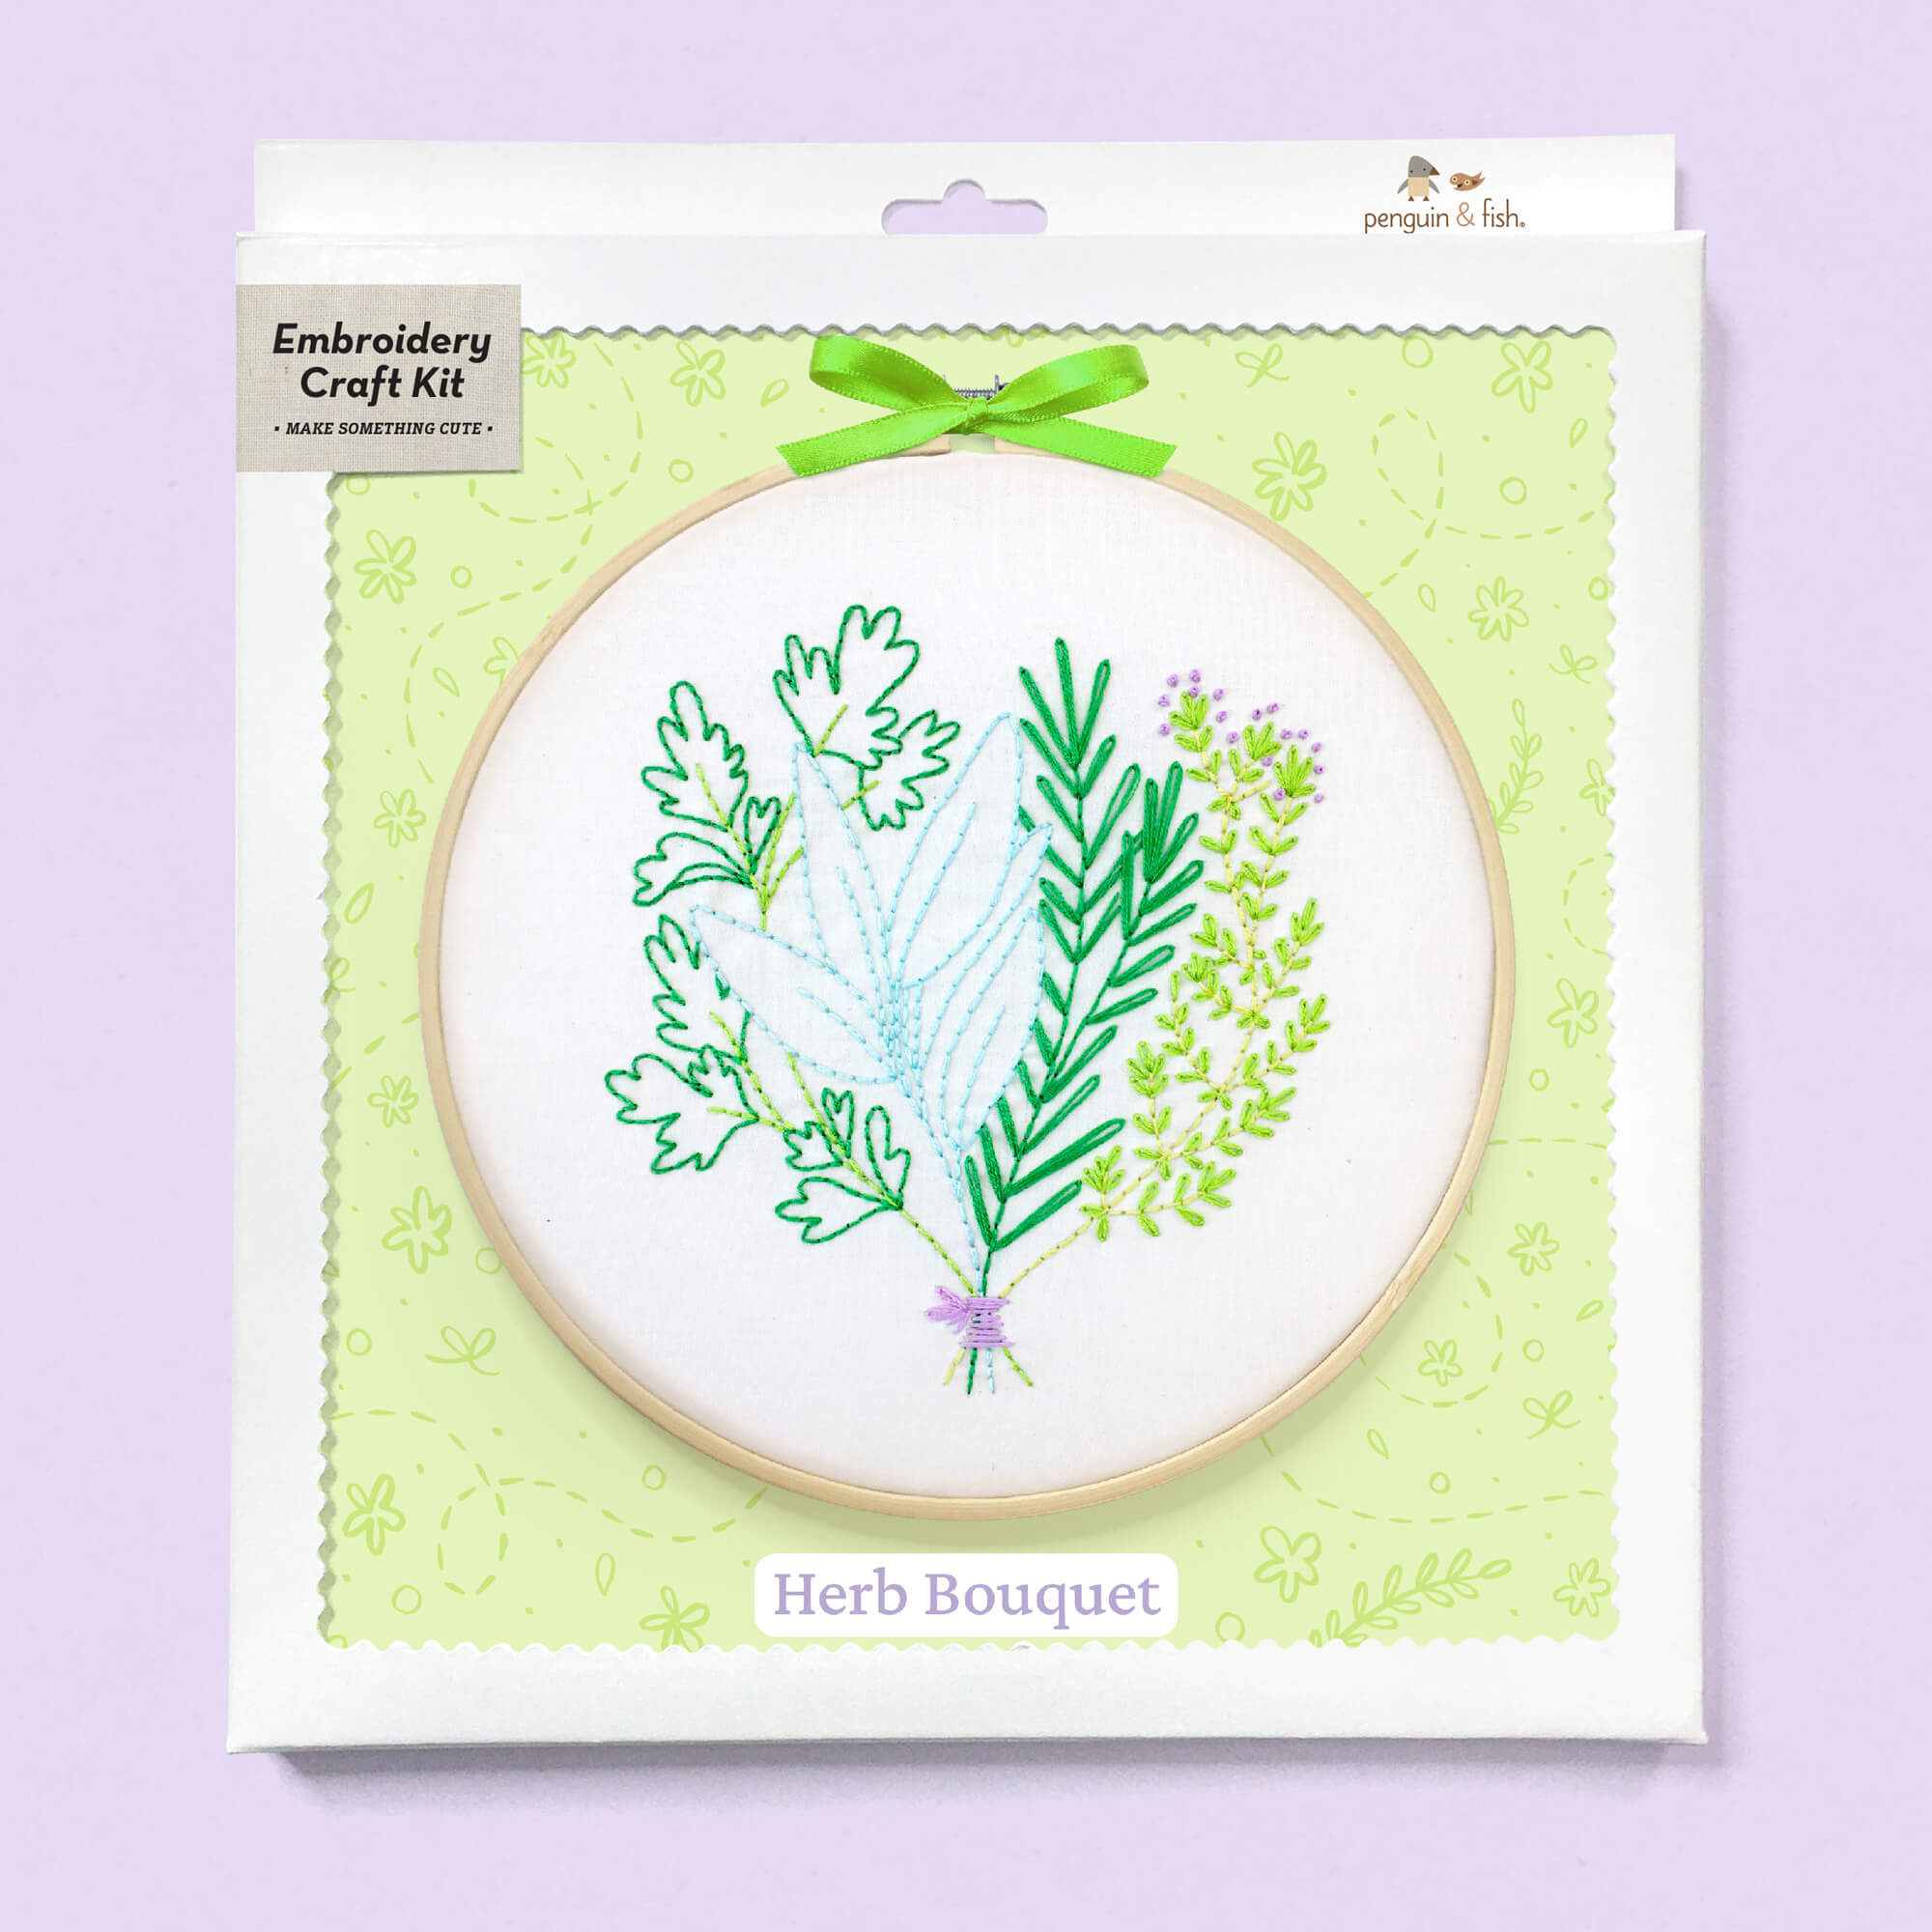 Herb Bouquet embroidery kit in a box